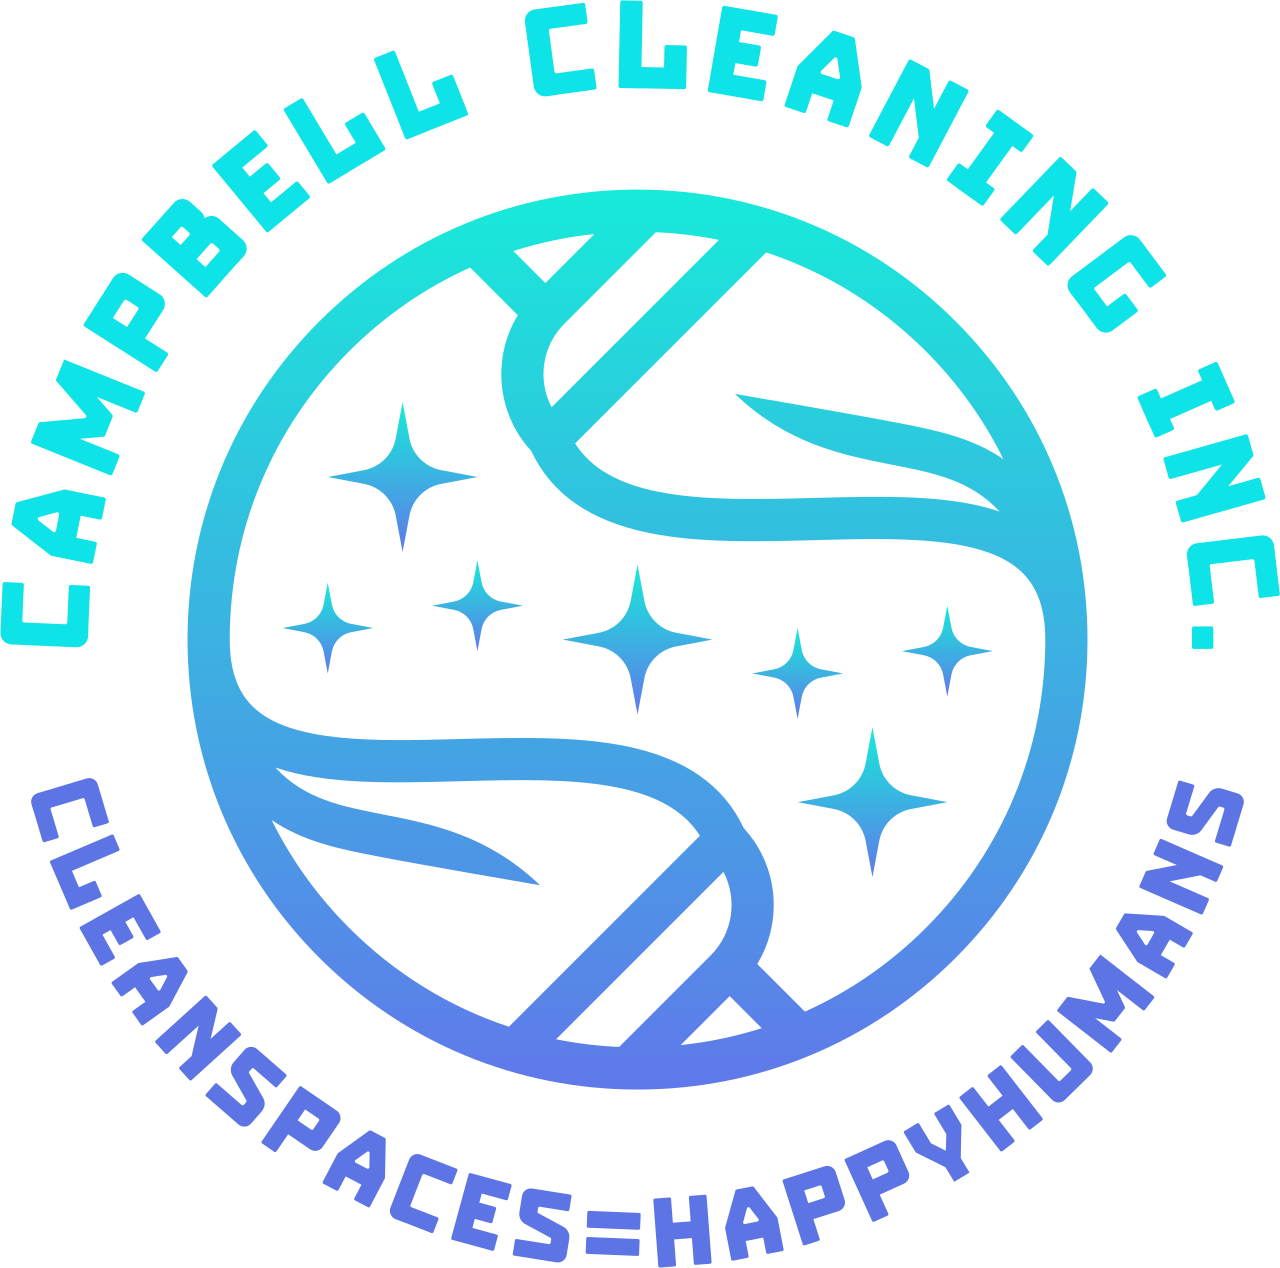 CAMPBELL CLEANING INC.'s logo